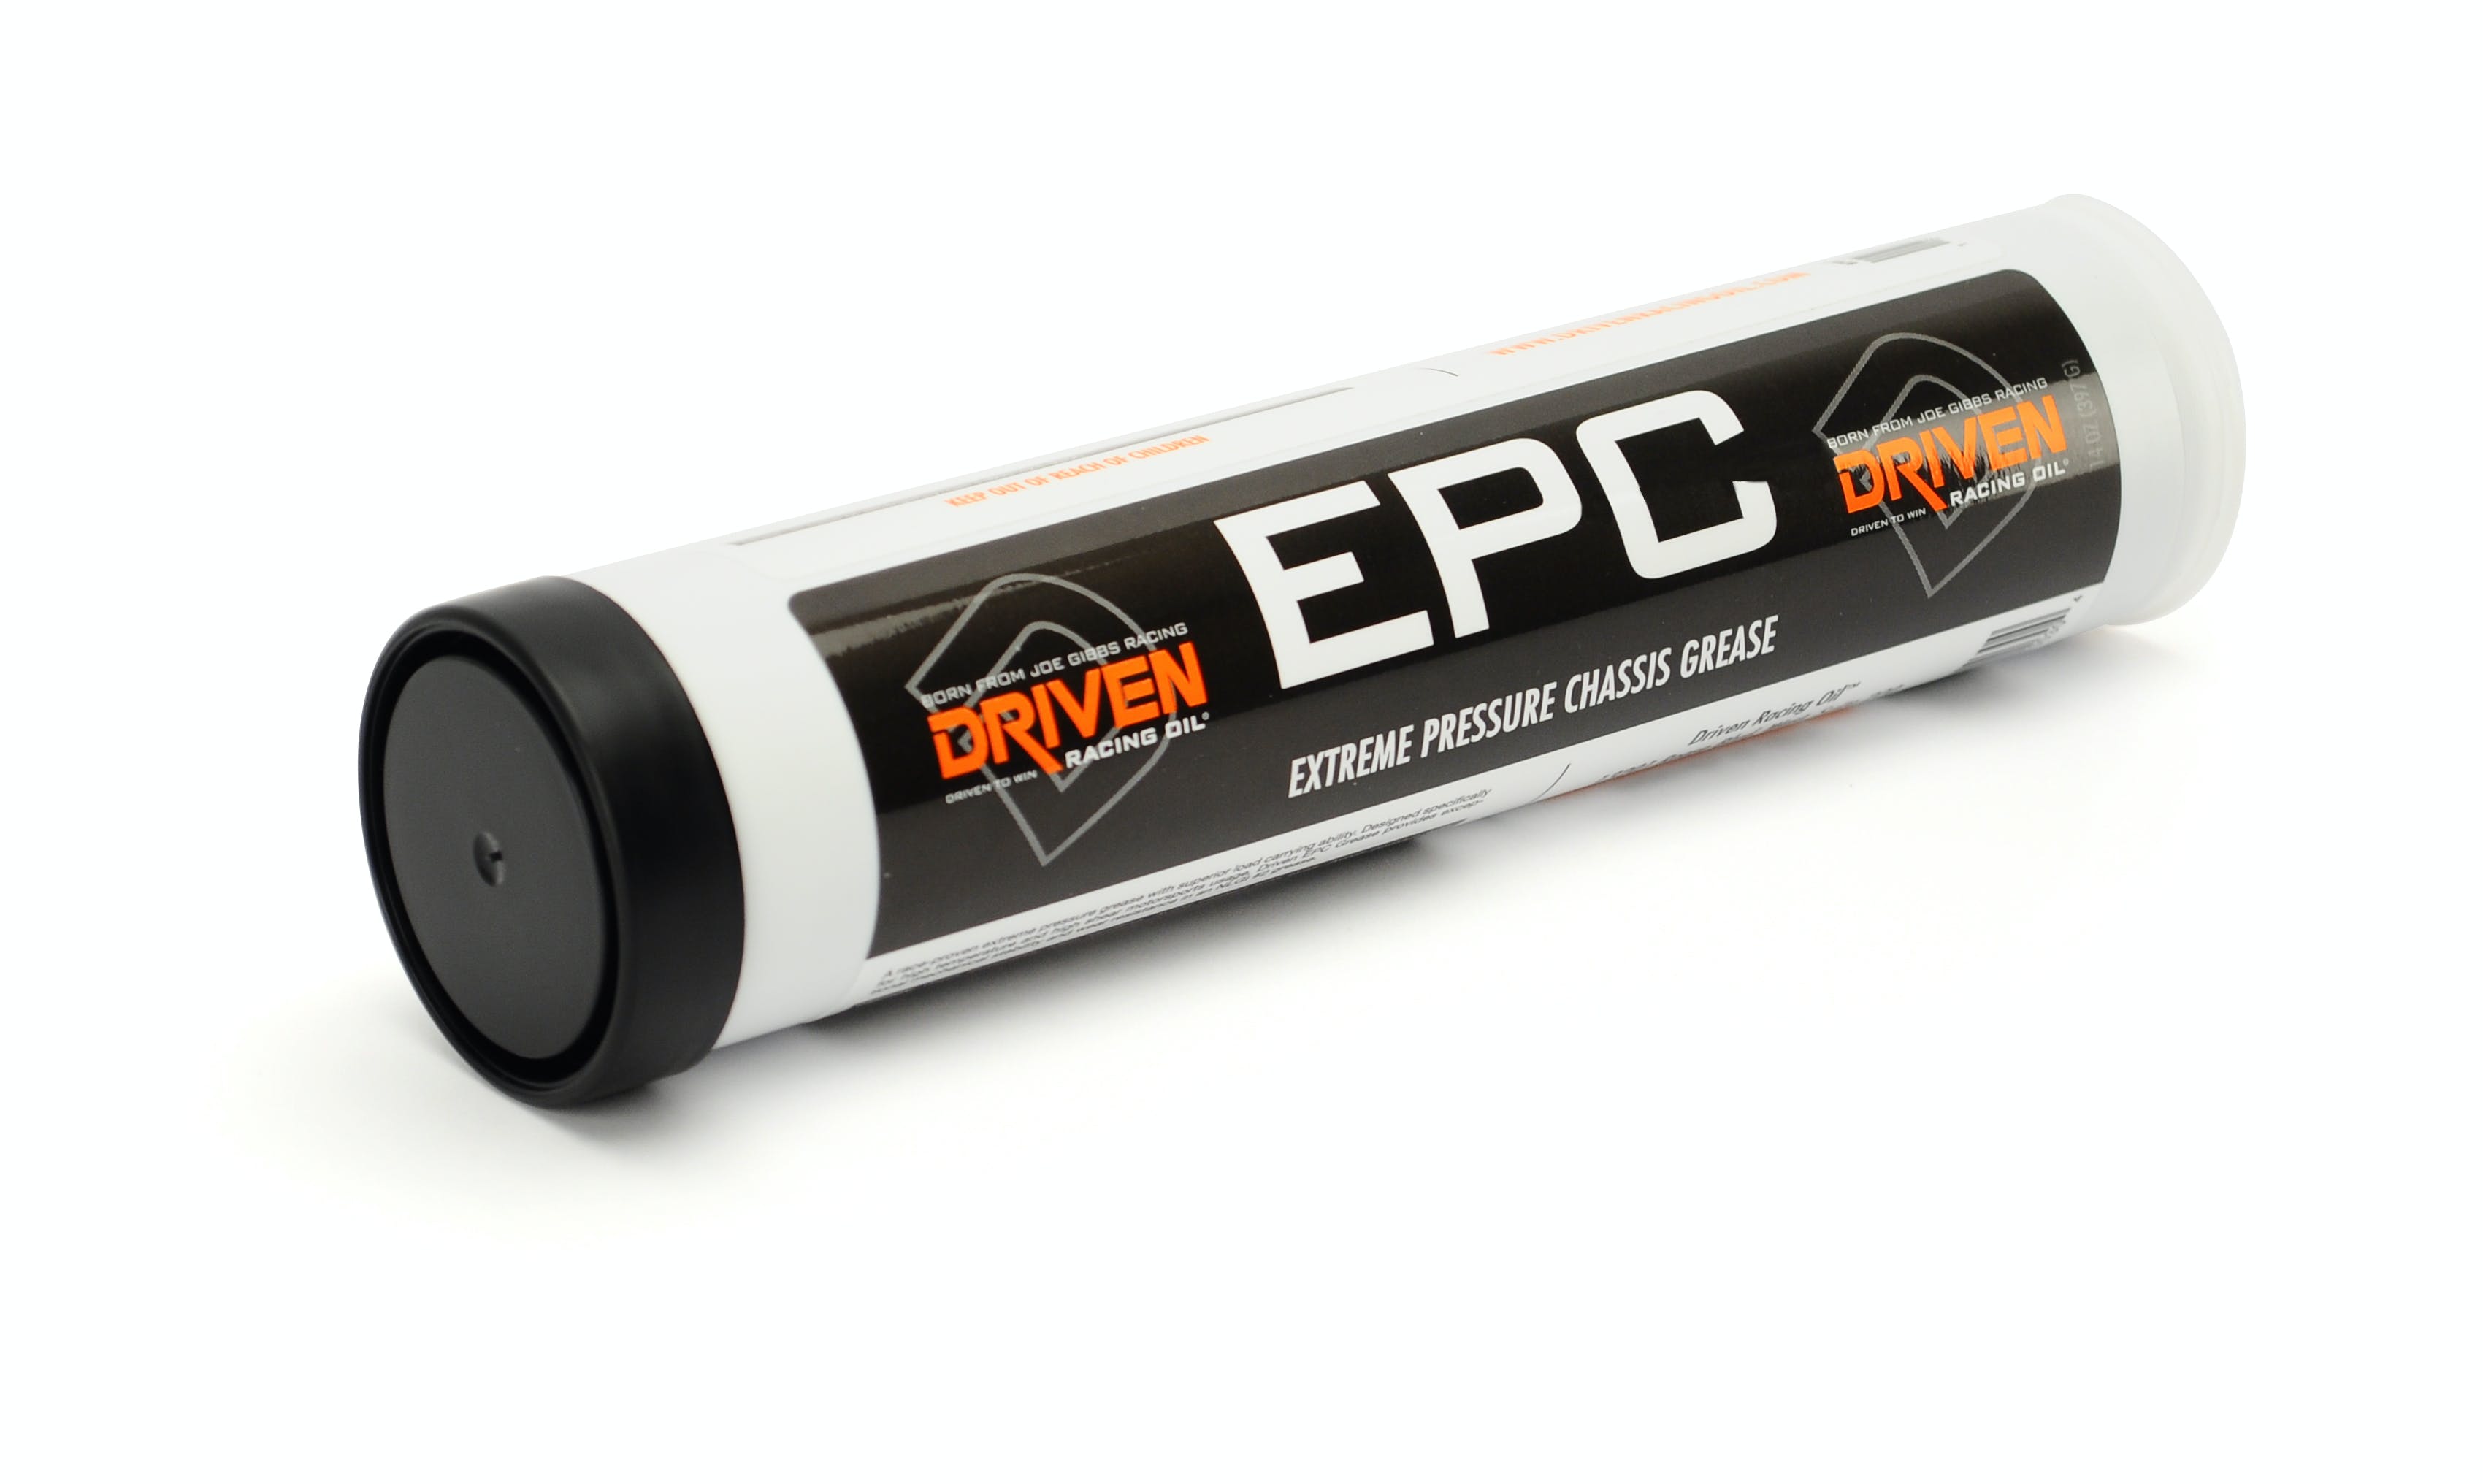 Driven Racing Oil 70030 Extreme Pressure Chassis Grease (400 gm Cartridge)